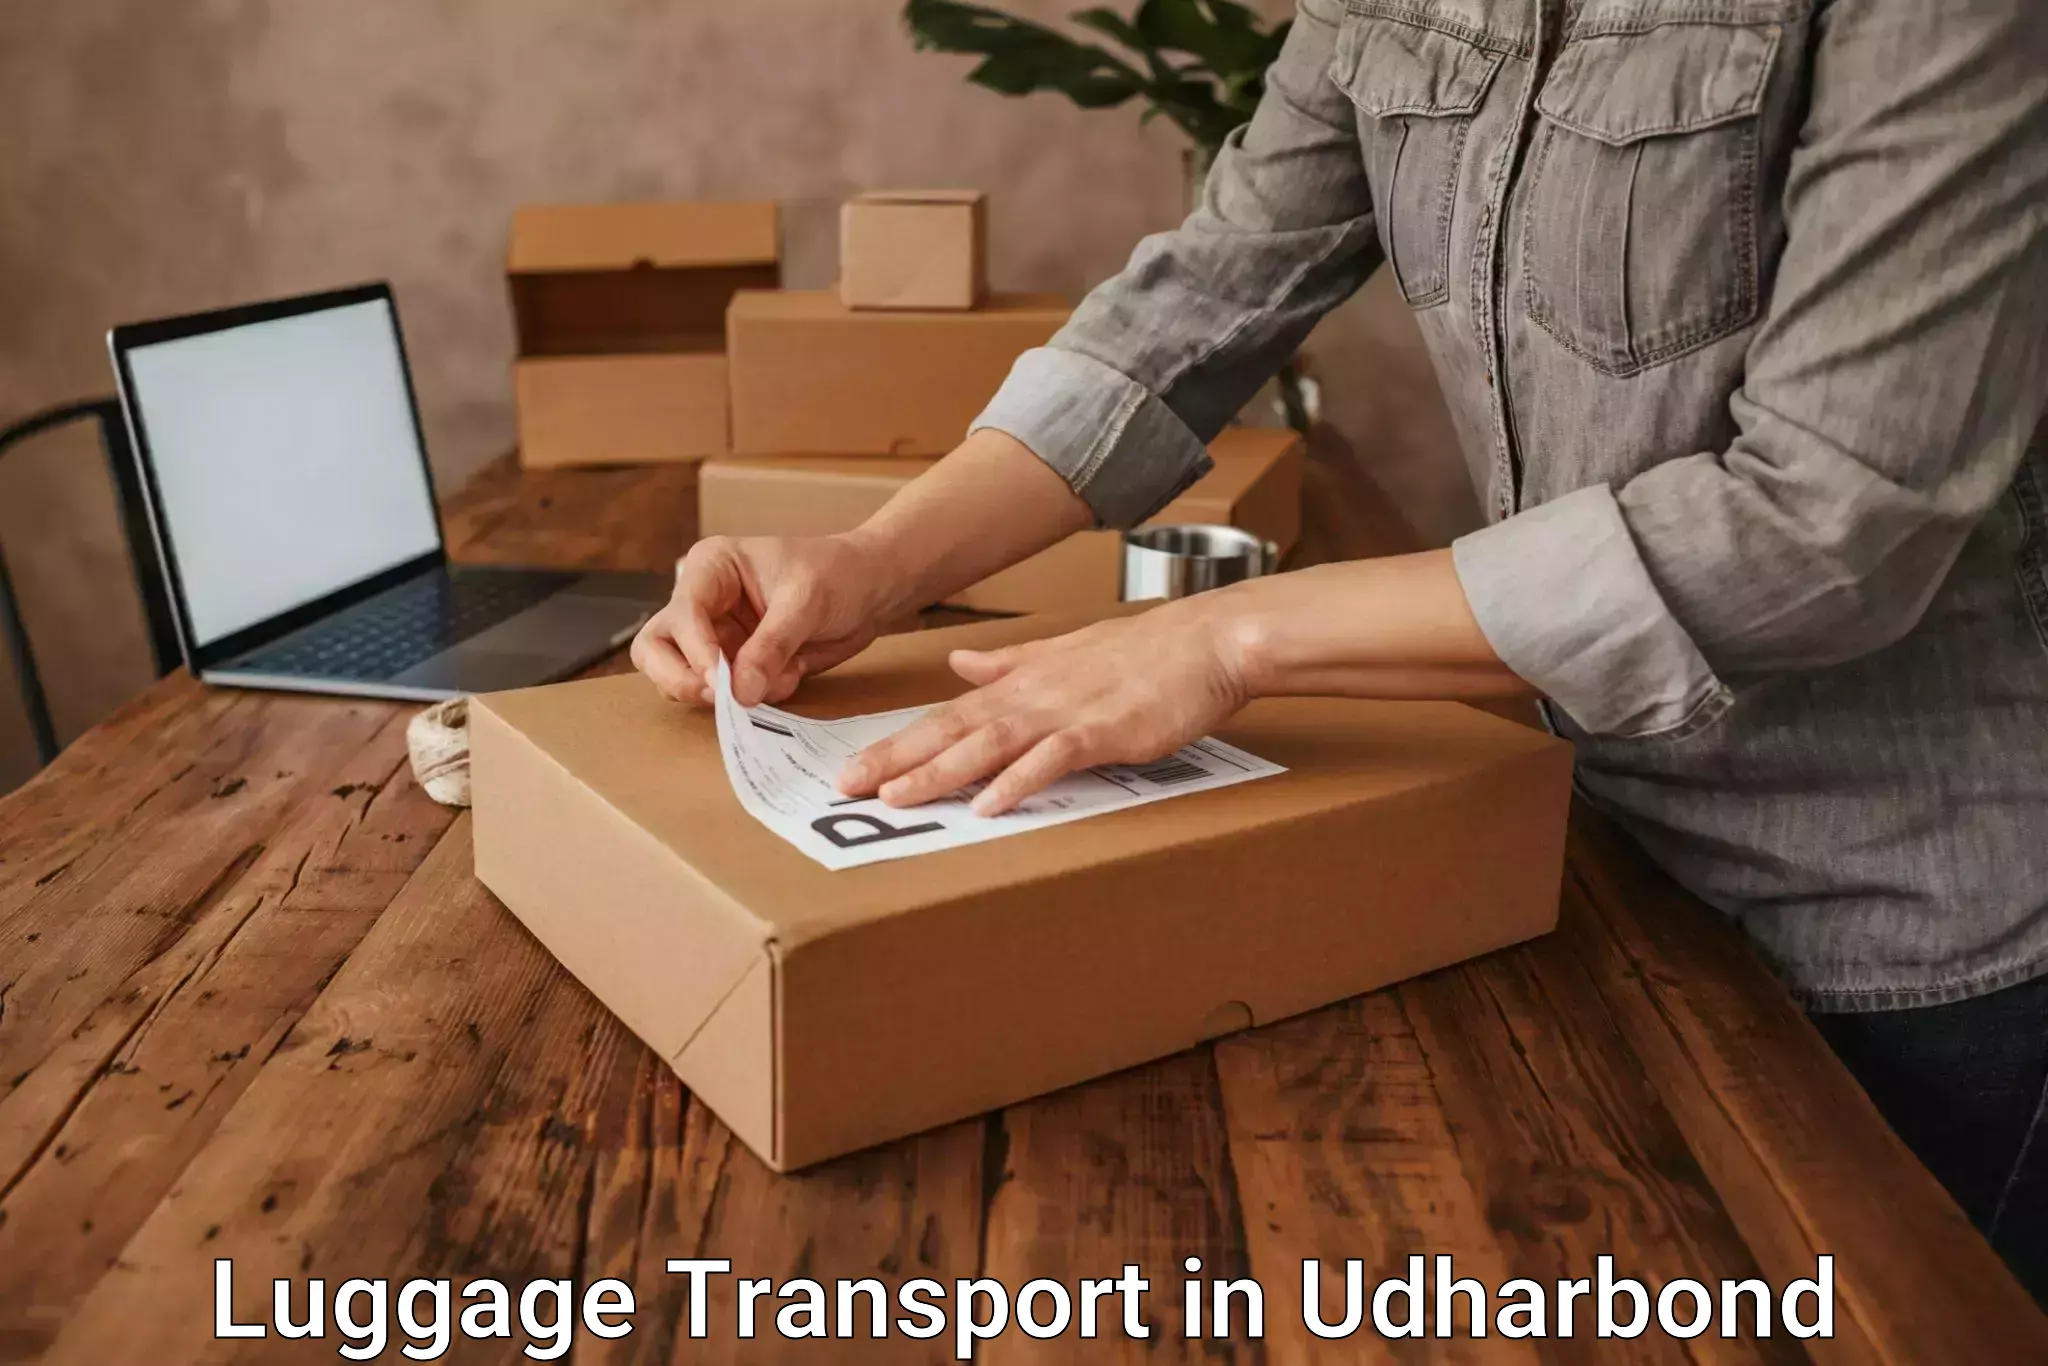 Long distance luggage transport in Udharbond